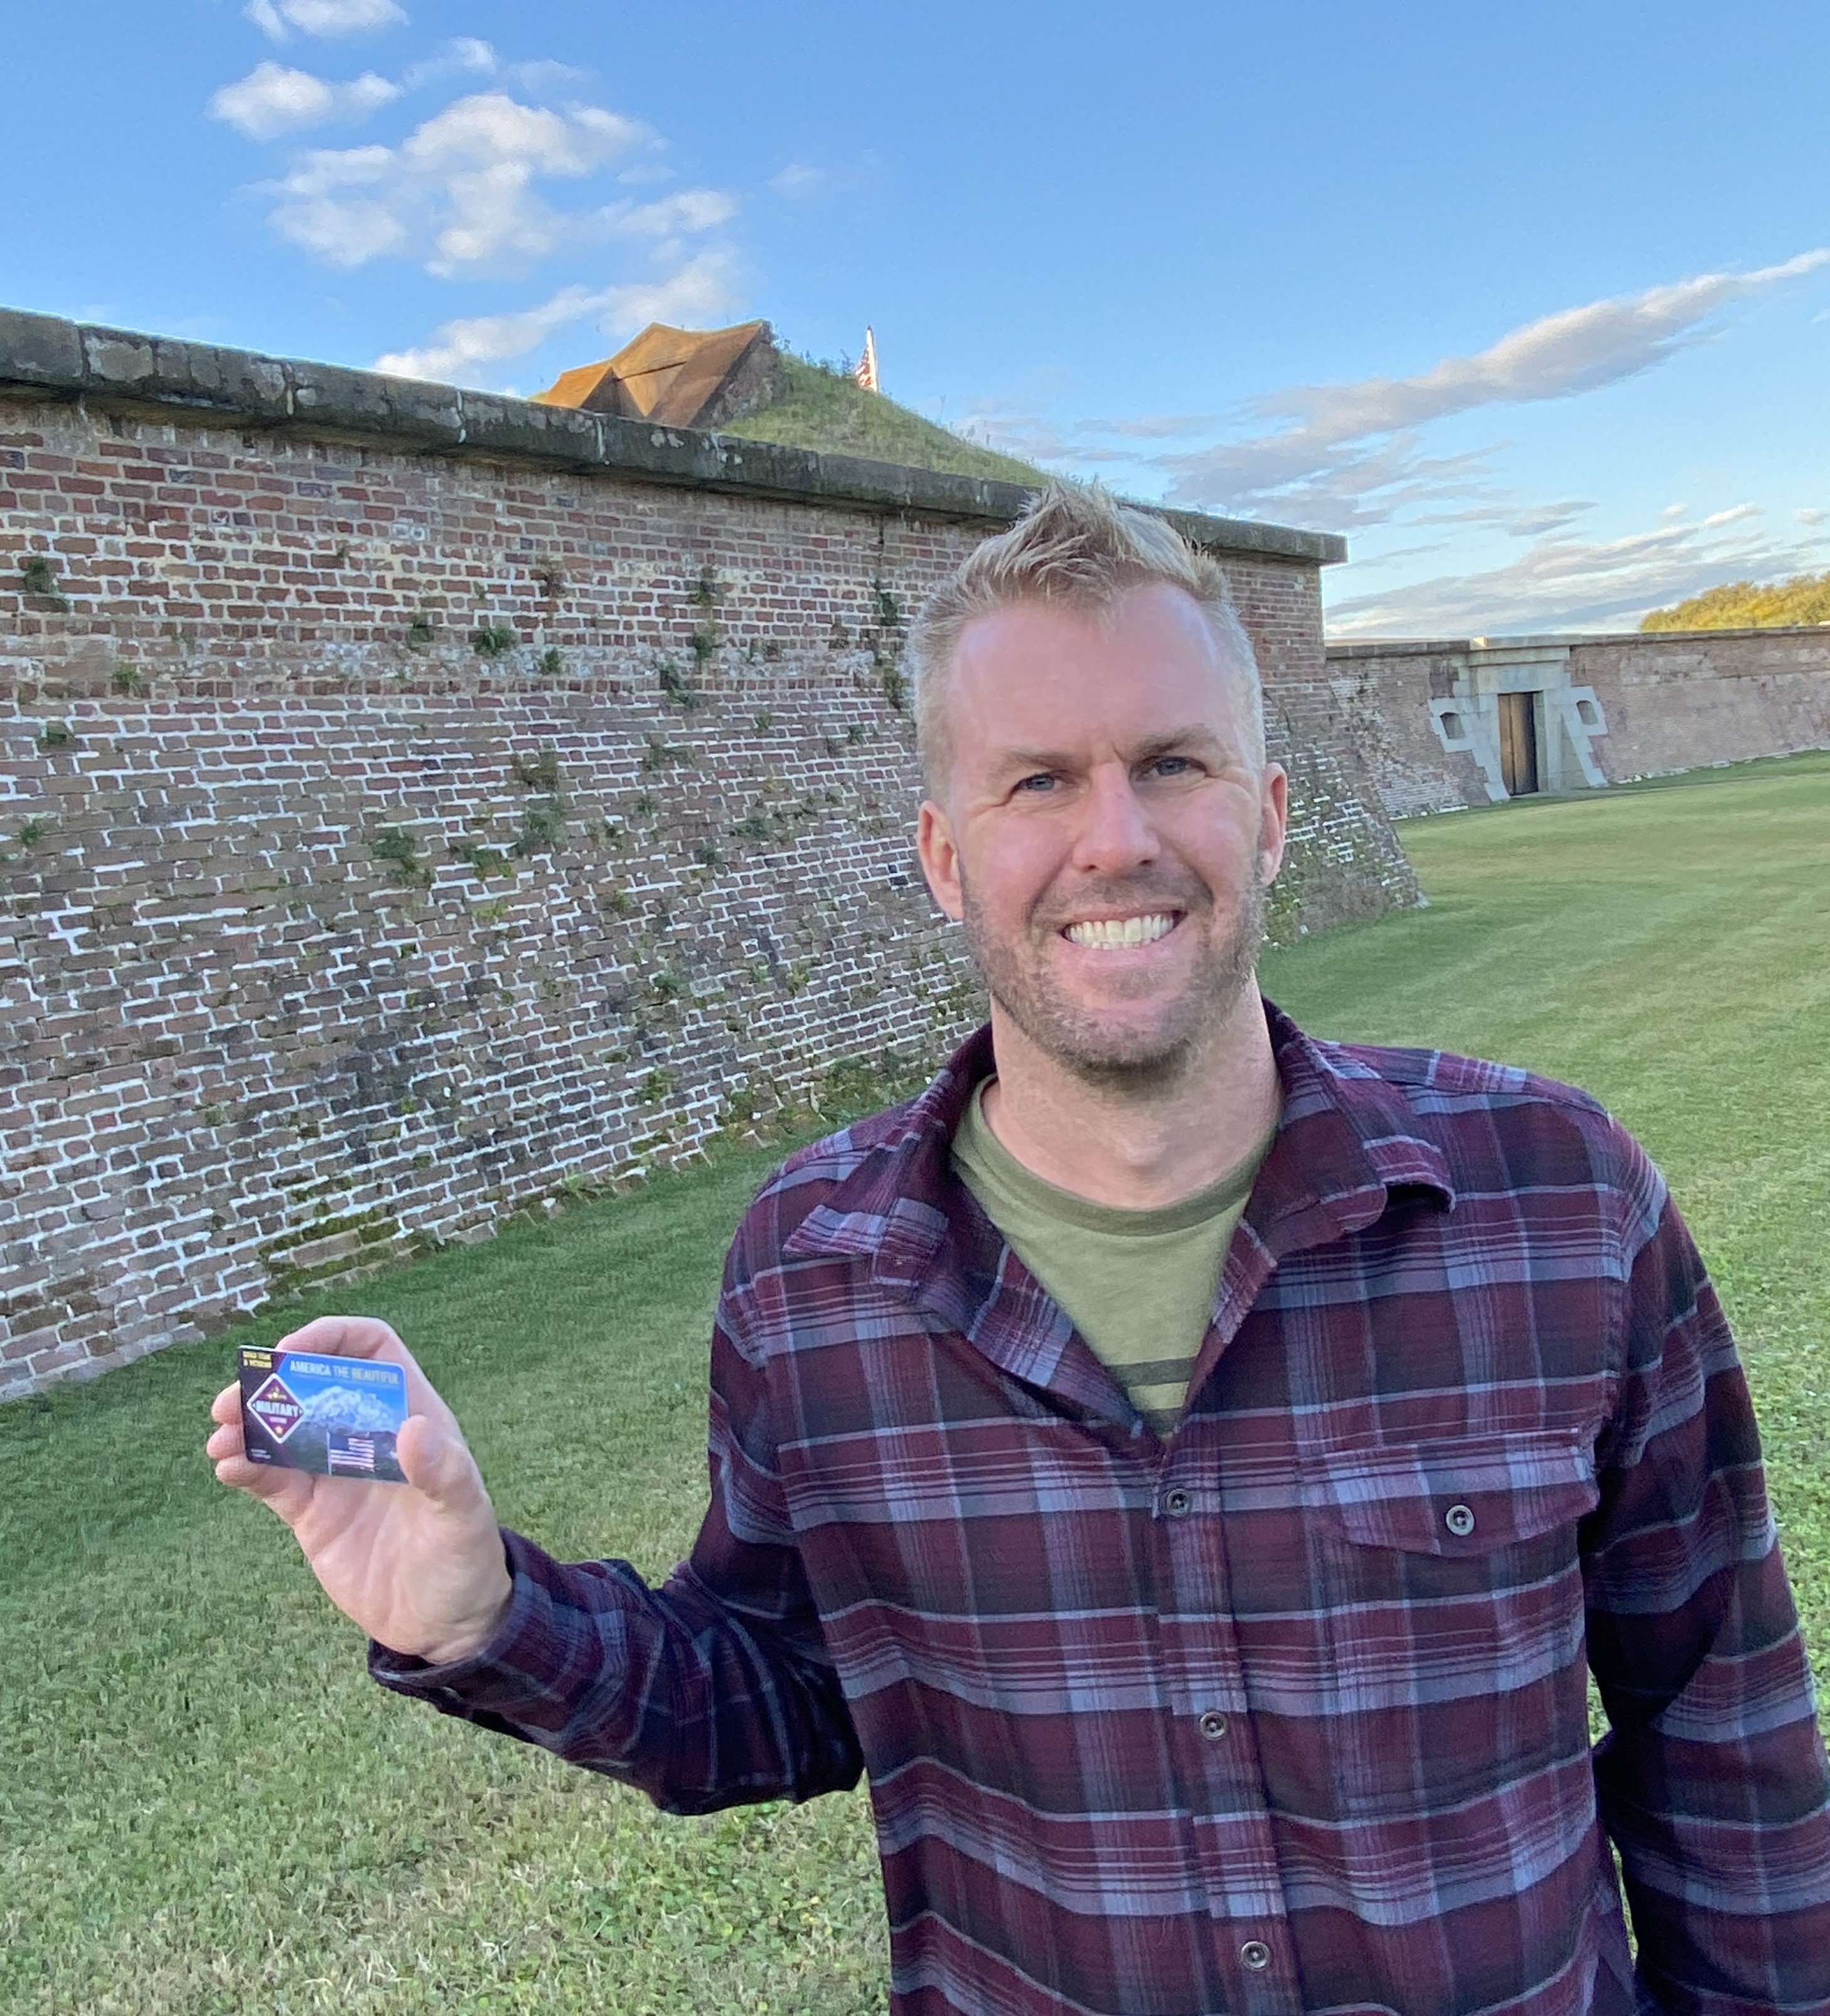 A young man wearing a plaid shirt holds a park pass in his right hand. He is standing on grass in front of the wall of a historic fort.